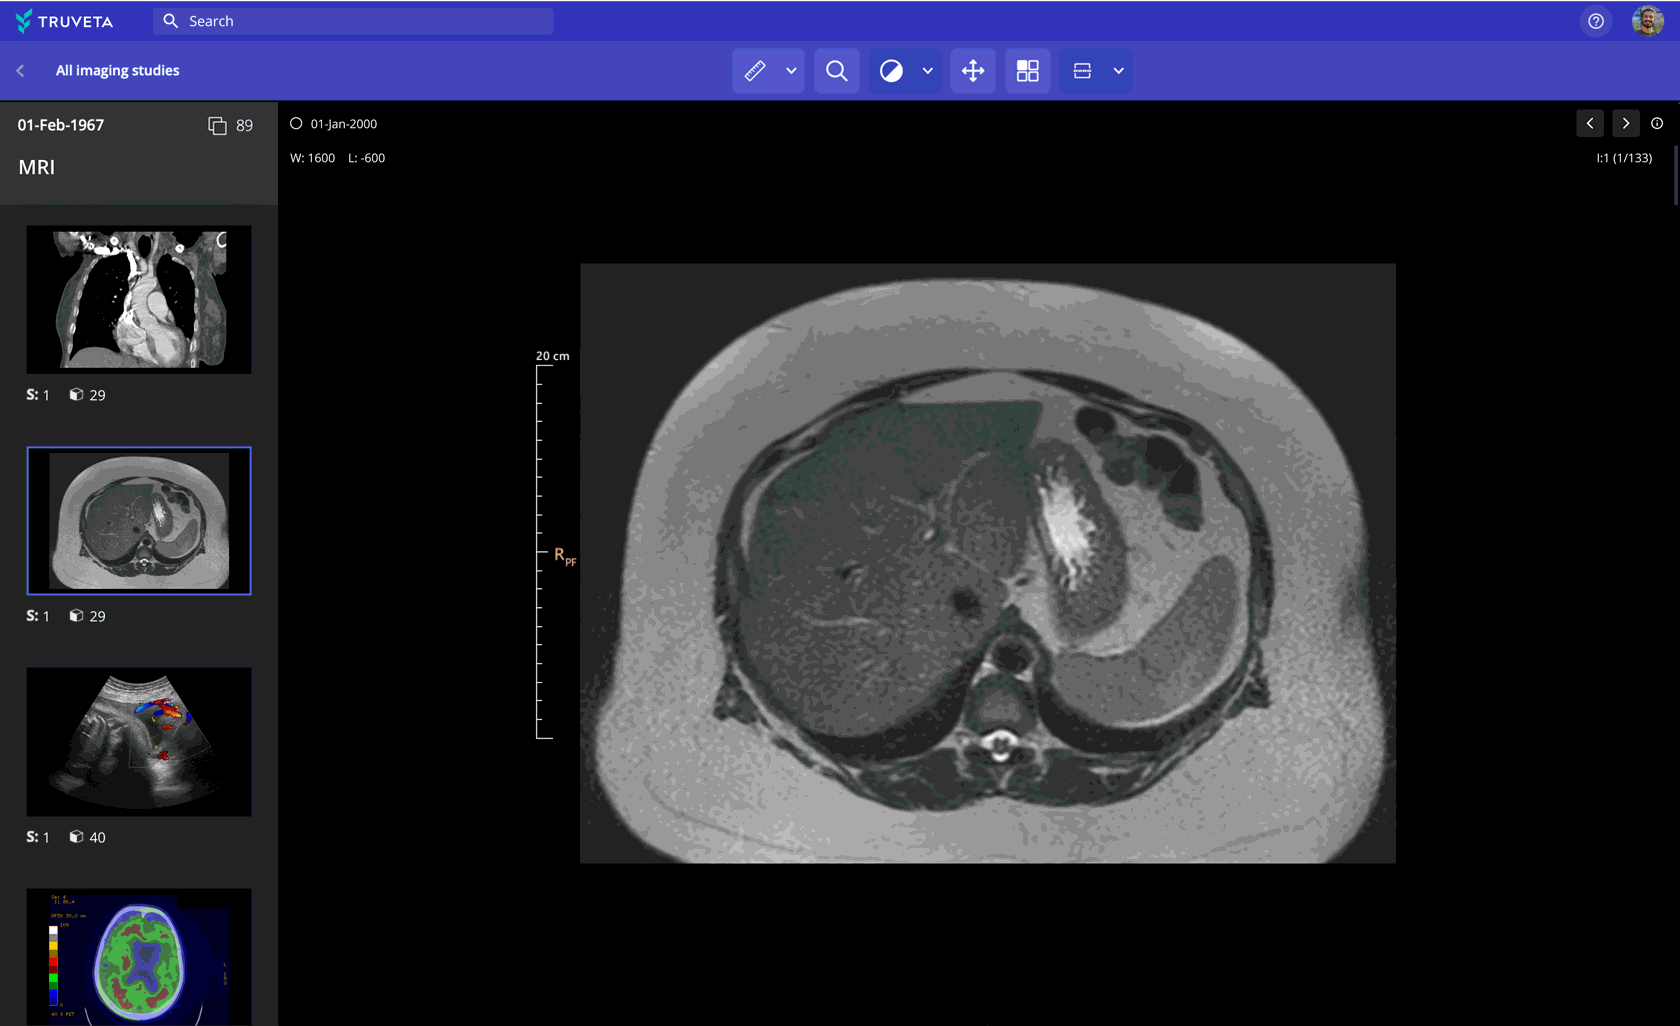 Truveta now empowers researchers to learn from millions of de-identified medical images – across all modalities, including MRI, CT, X-ray, ultrasound, mammogram, PET, and nuclear medicine – integrated with the patient’s EHR data to more deeply understand symptoms, diagnoses, disease progression, and more.